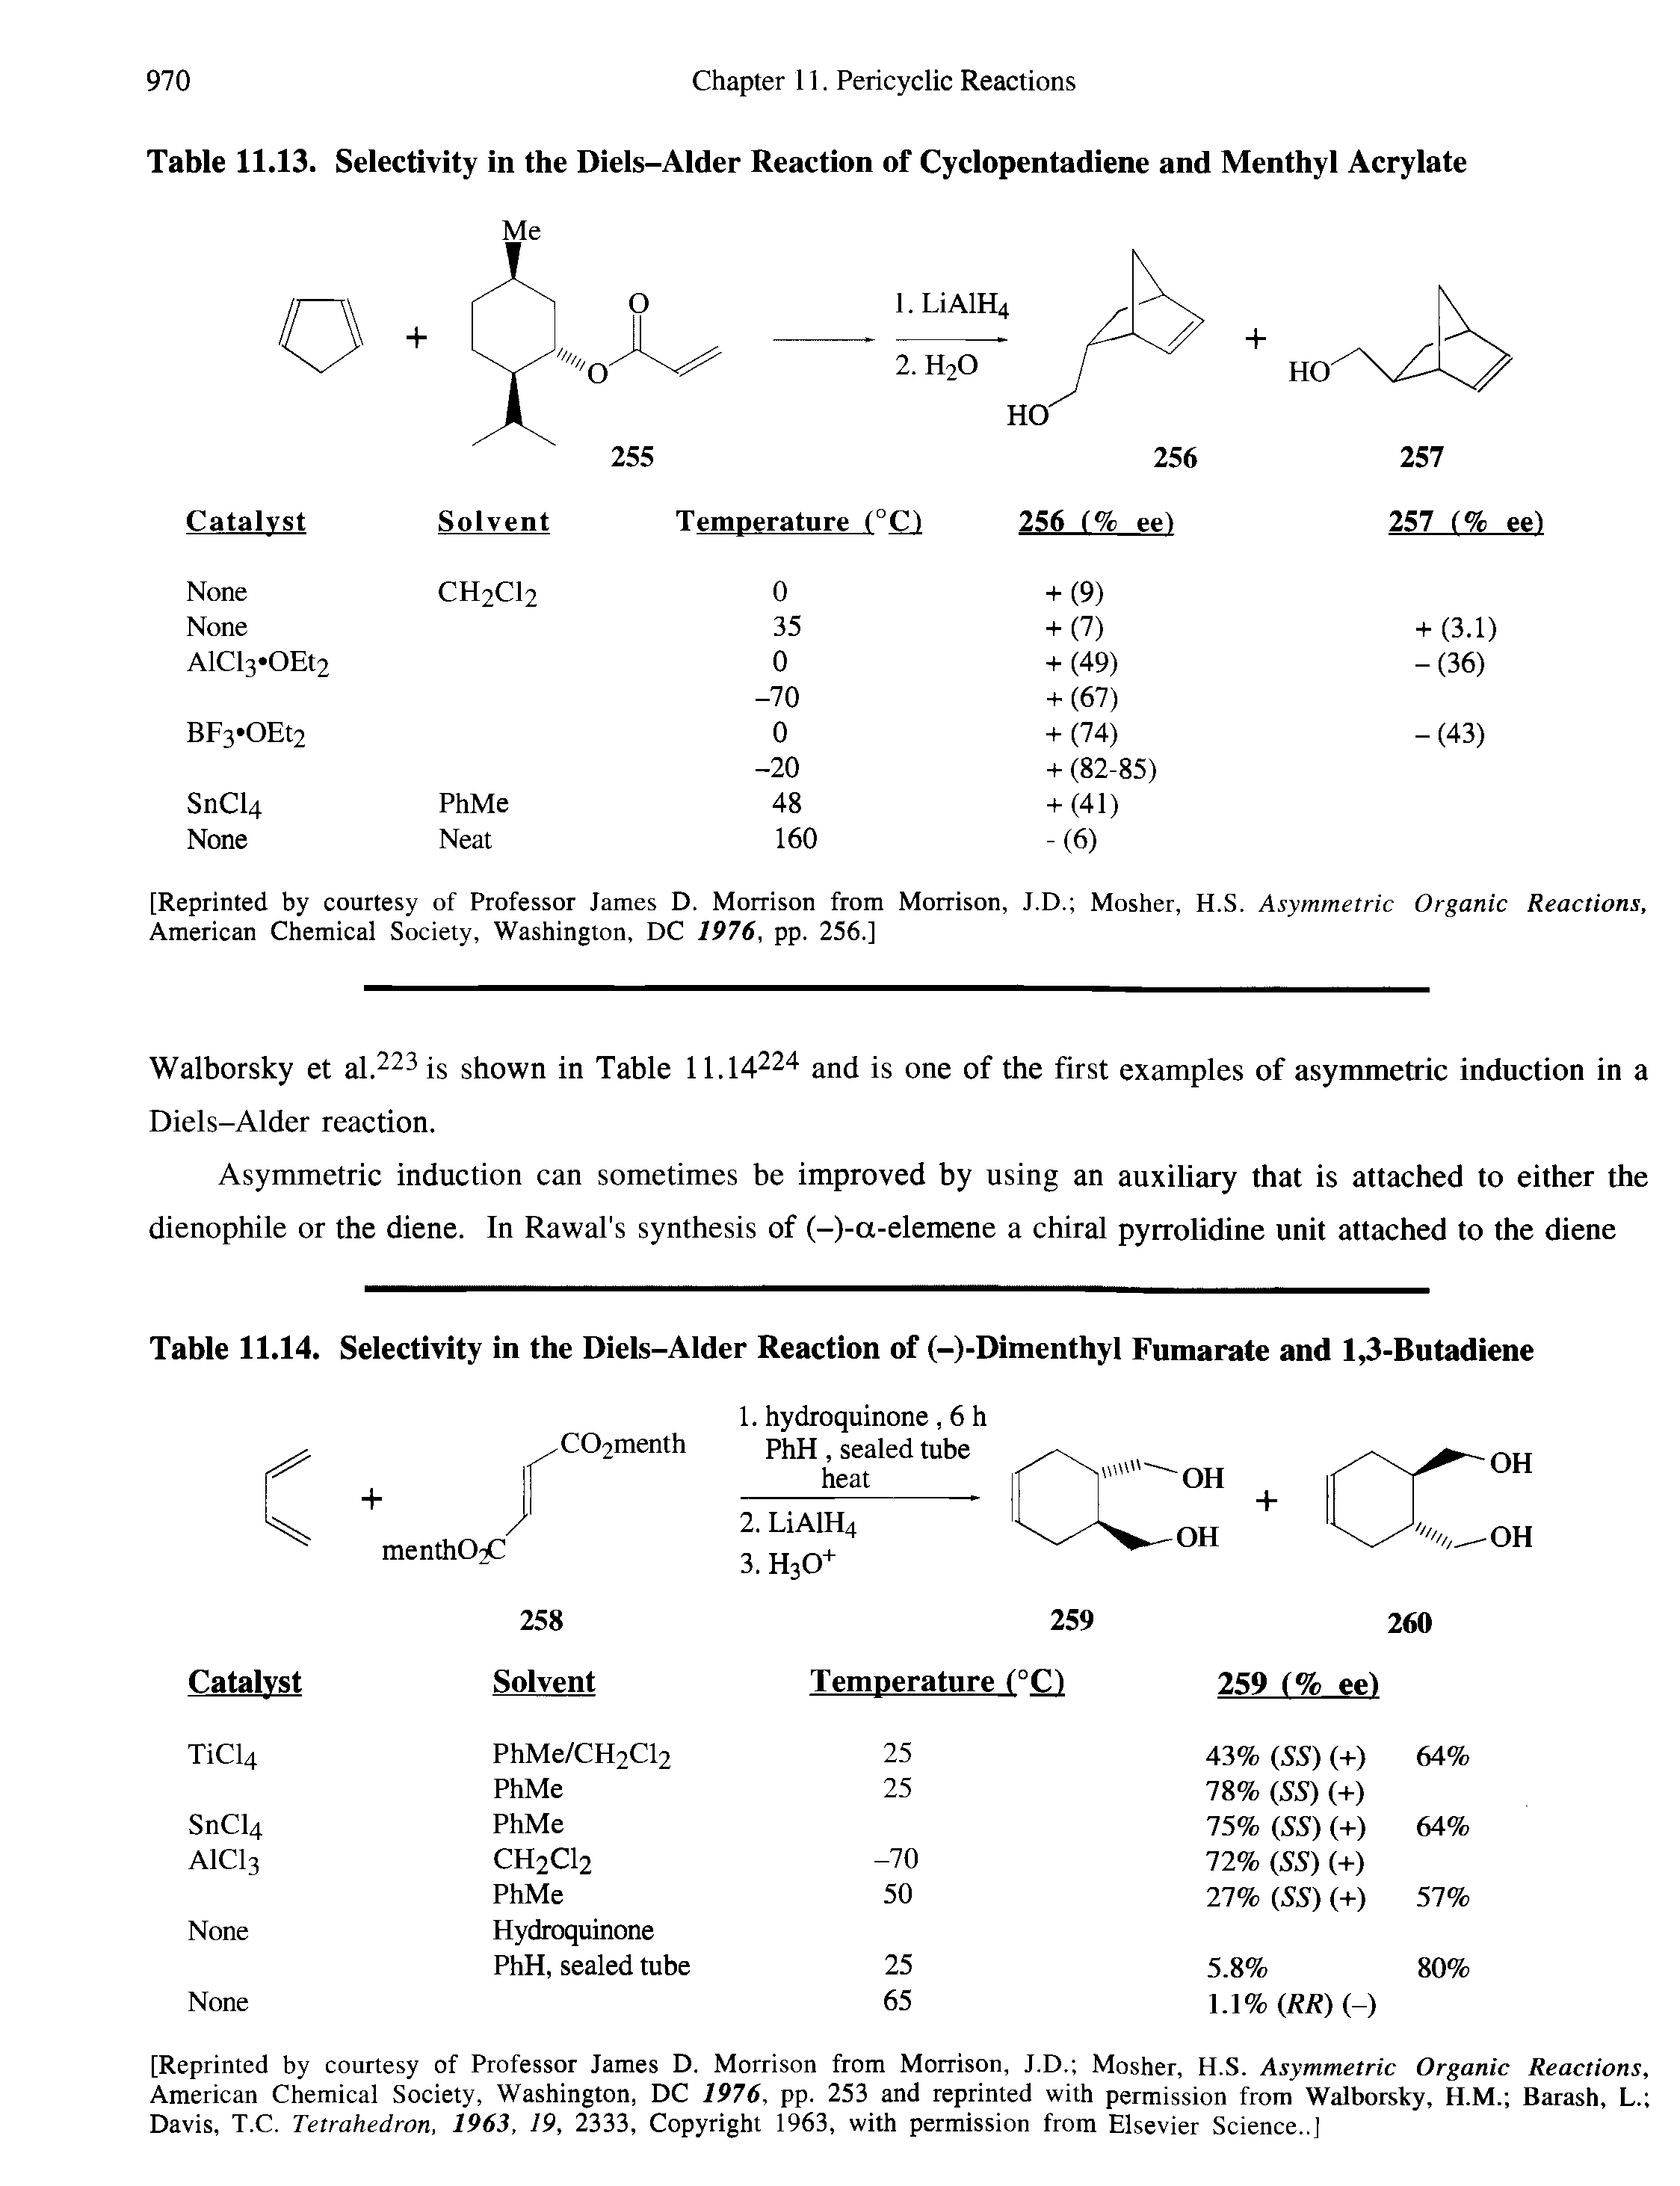 Table 11.14. Selectivity in the Diels-Alder Reaction of (-)-Dimenthyl Fumarate and 1,3-Butadiene...